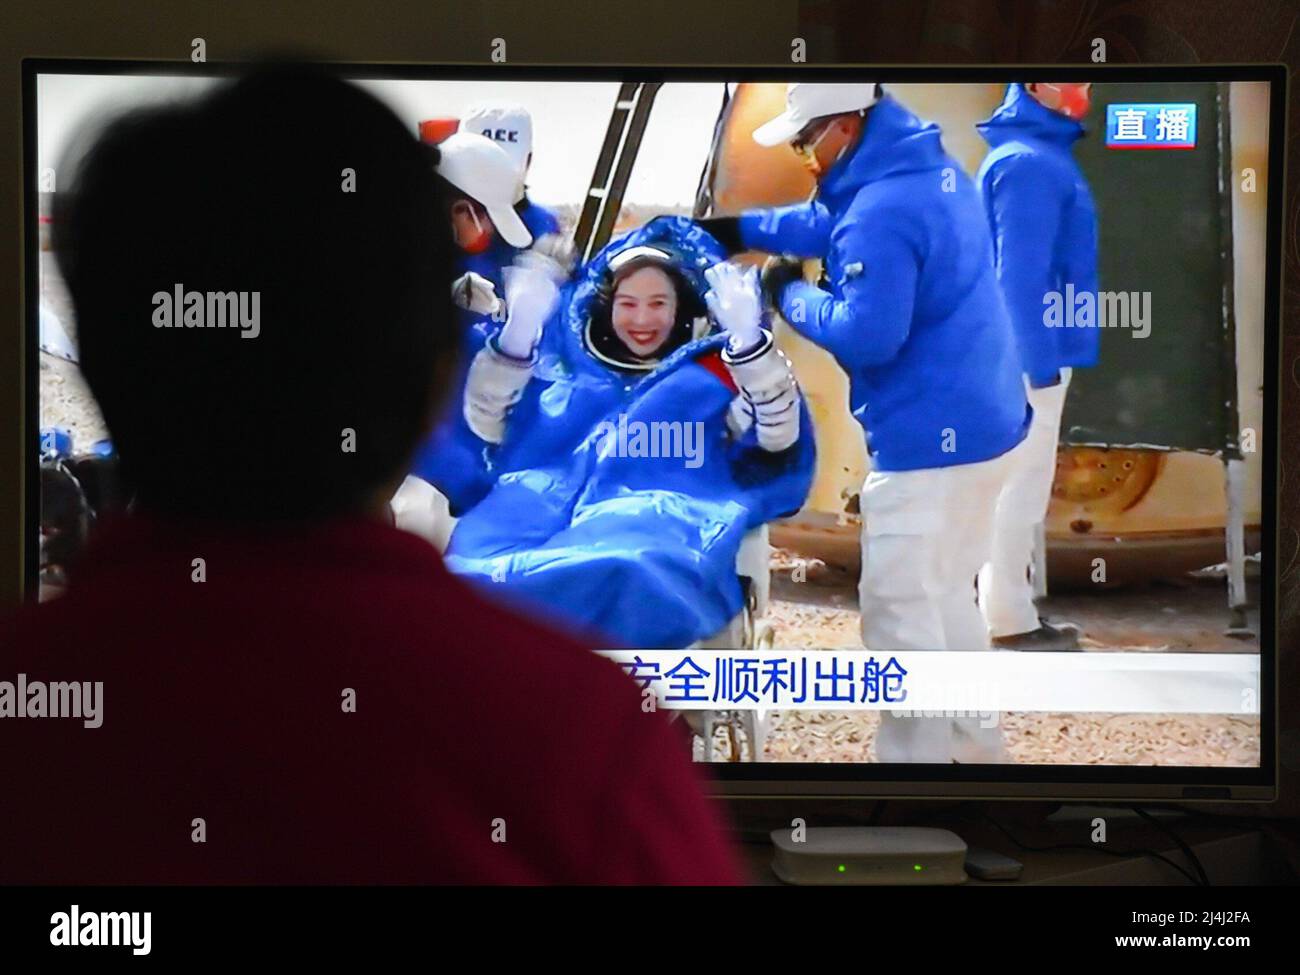 A woman watches a live TV broadcast of the successful landing of the Shenzhou XIII re-entry module with the astronaut Wang Yaping on the TV screen. After orbiting Earth for six months, the three crew members of China's Shenzhou XIII mission departed from the Tiangong space station. They returned to the mother planet on Saturday morning, finishing the nation's longest human-crewed spaceflight. Major General Zhai Zhigang, the mission commander, Senior Colonel Wang Yaping, and Senior Colonel Ye Guangfu breathed fresh air for the first time after the half-year space journey as ground recovery pers Stock Photo